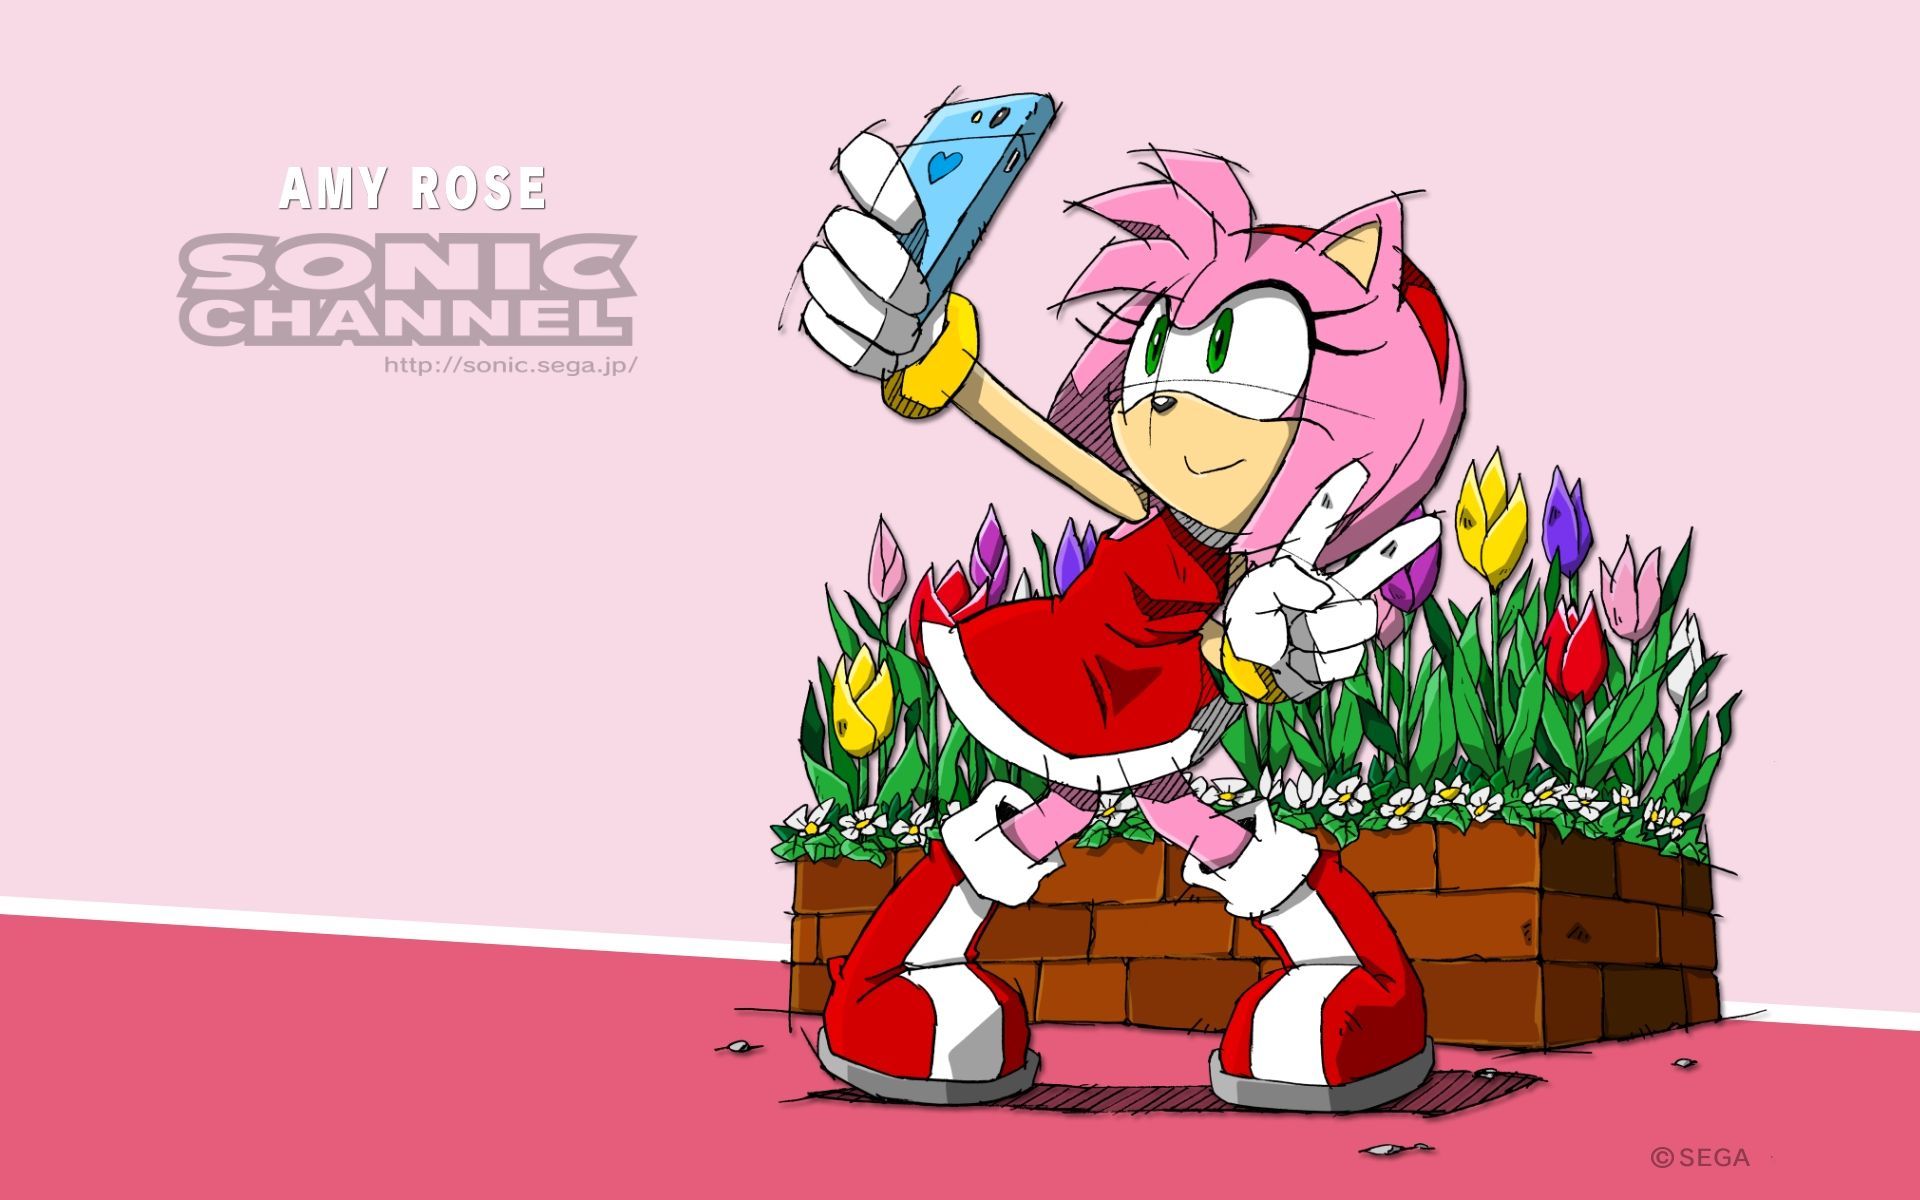 Amy Rose April 2016 Sonic Channel Wallpaper within Sonic Channel